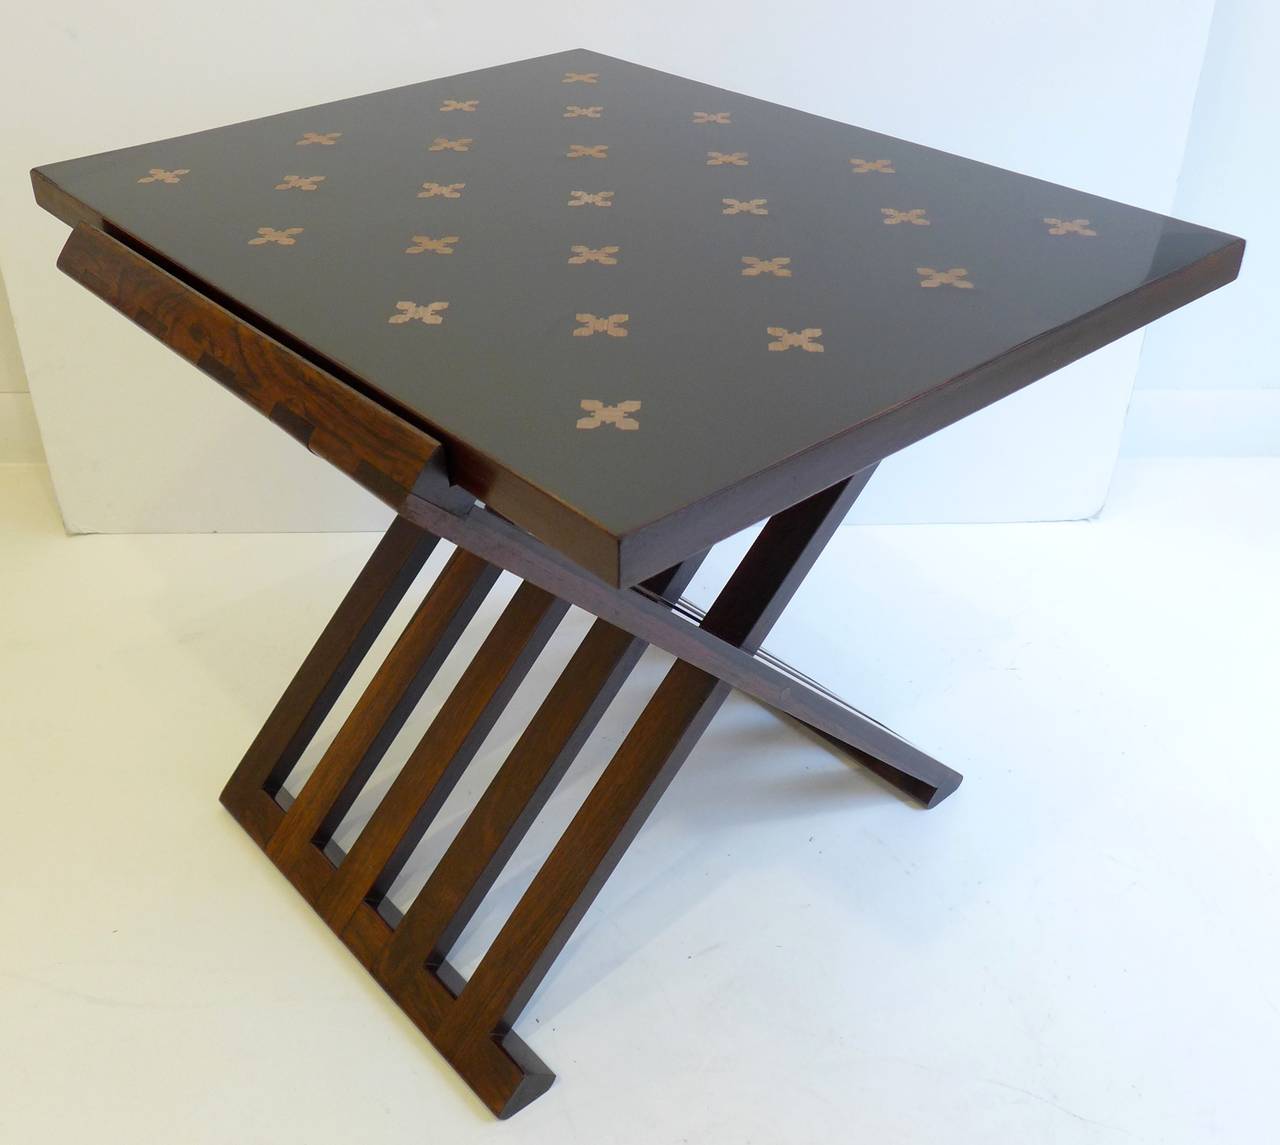 Parquetry occasional table, model 5425, designed by Edward Wormley and produced by Dunbar Furniture, circa 1956. The folding rosewood base holds the mahogany-edged top with bleached mahogany parquetry inset into black micarta. Retains the gold